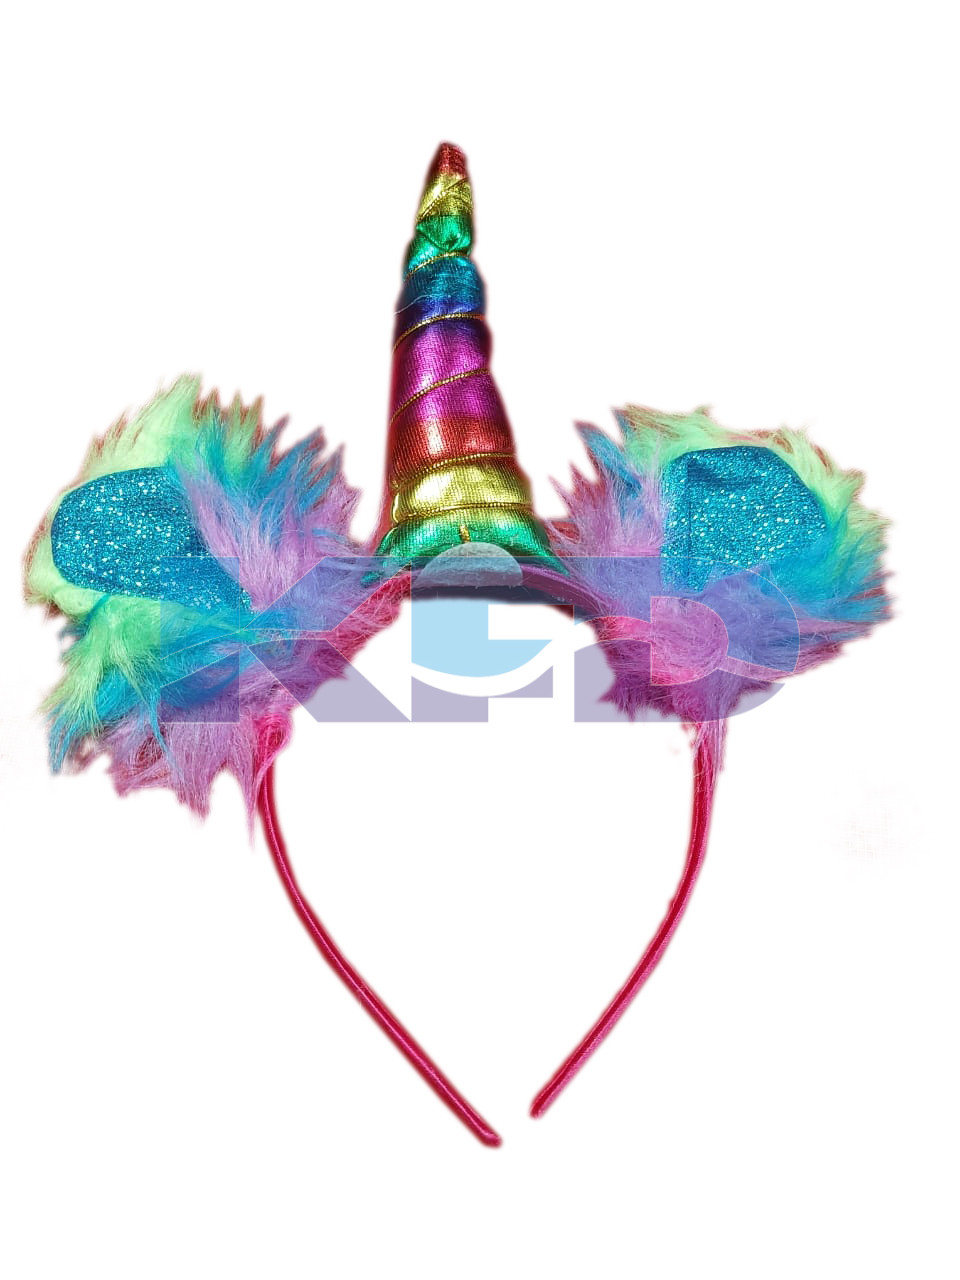 Unicorn-Headband western costume For School Annual function/Theme Party/Competition/Stage Shows/Birthday Party Dress